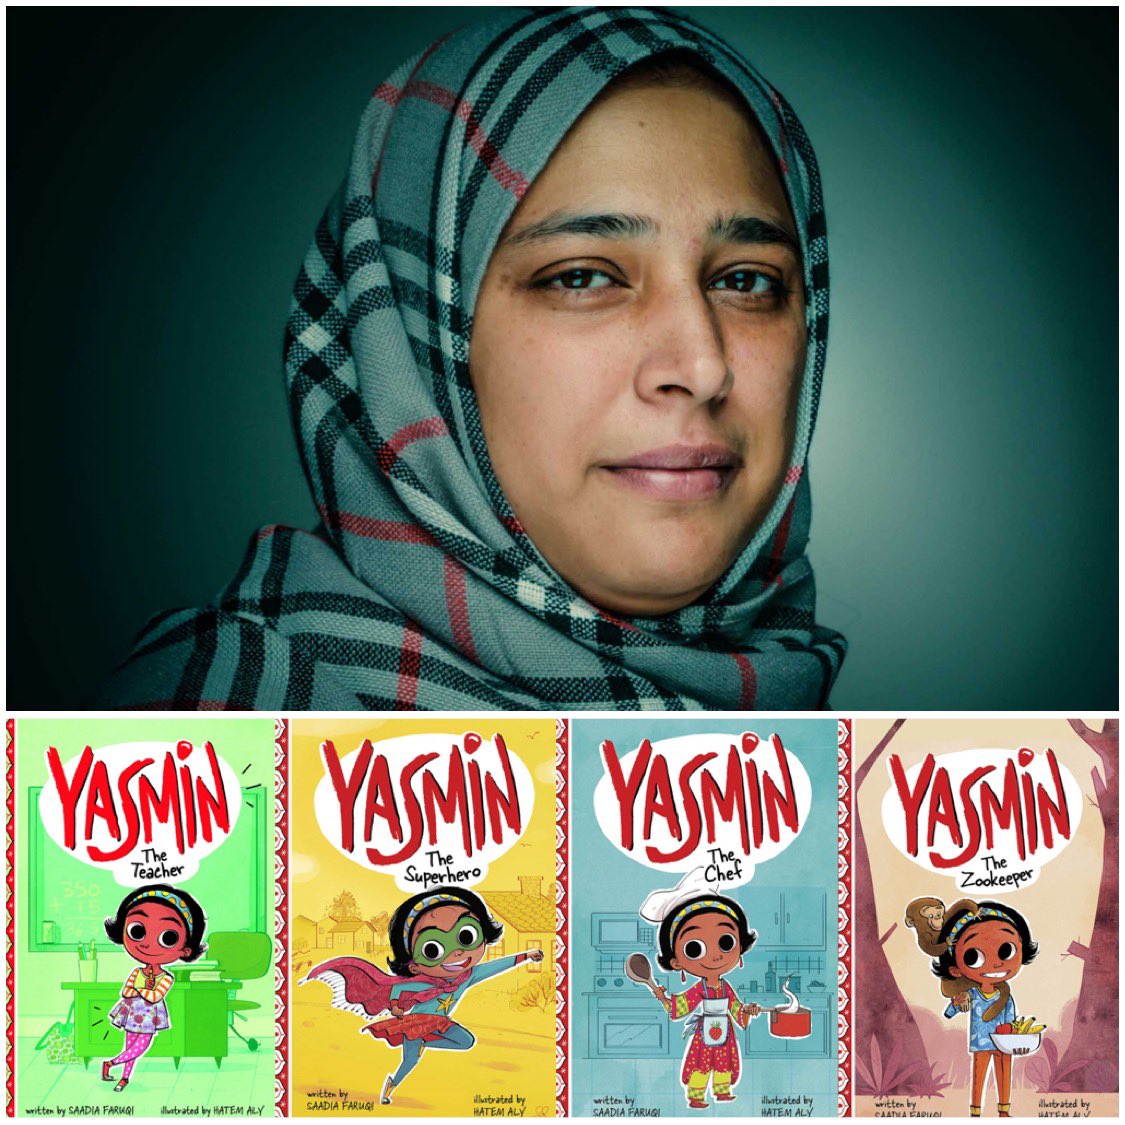 In just a few short days, @SaadiaFaruqi will be presenting to 2nd grade about her author life! We cannot wait!

#diverseauthors #authorvisit #beginningchapterbook